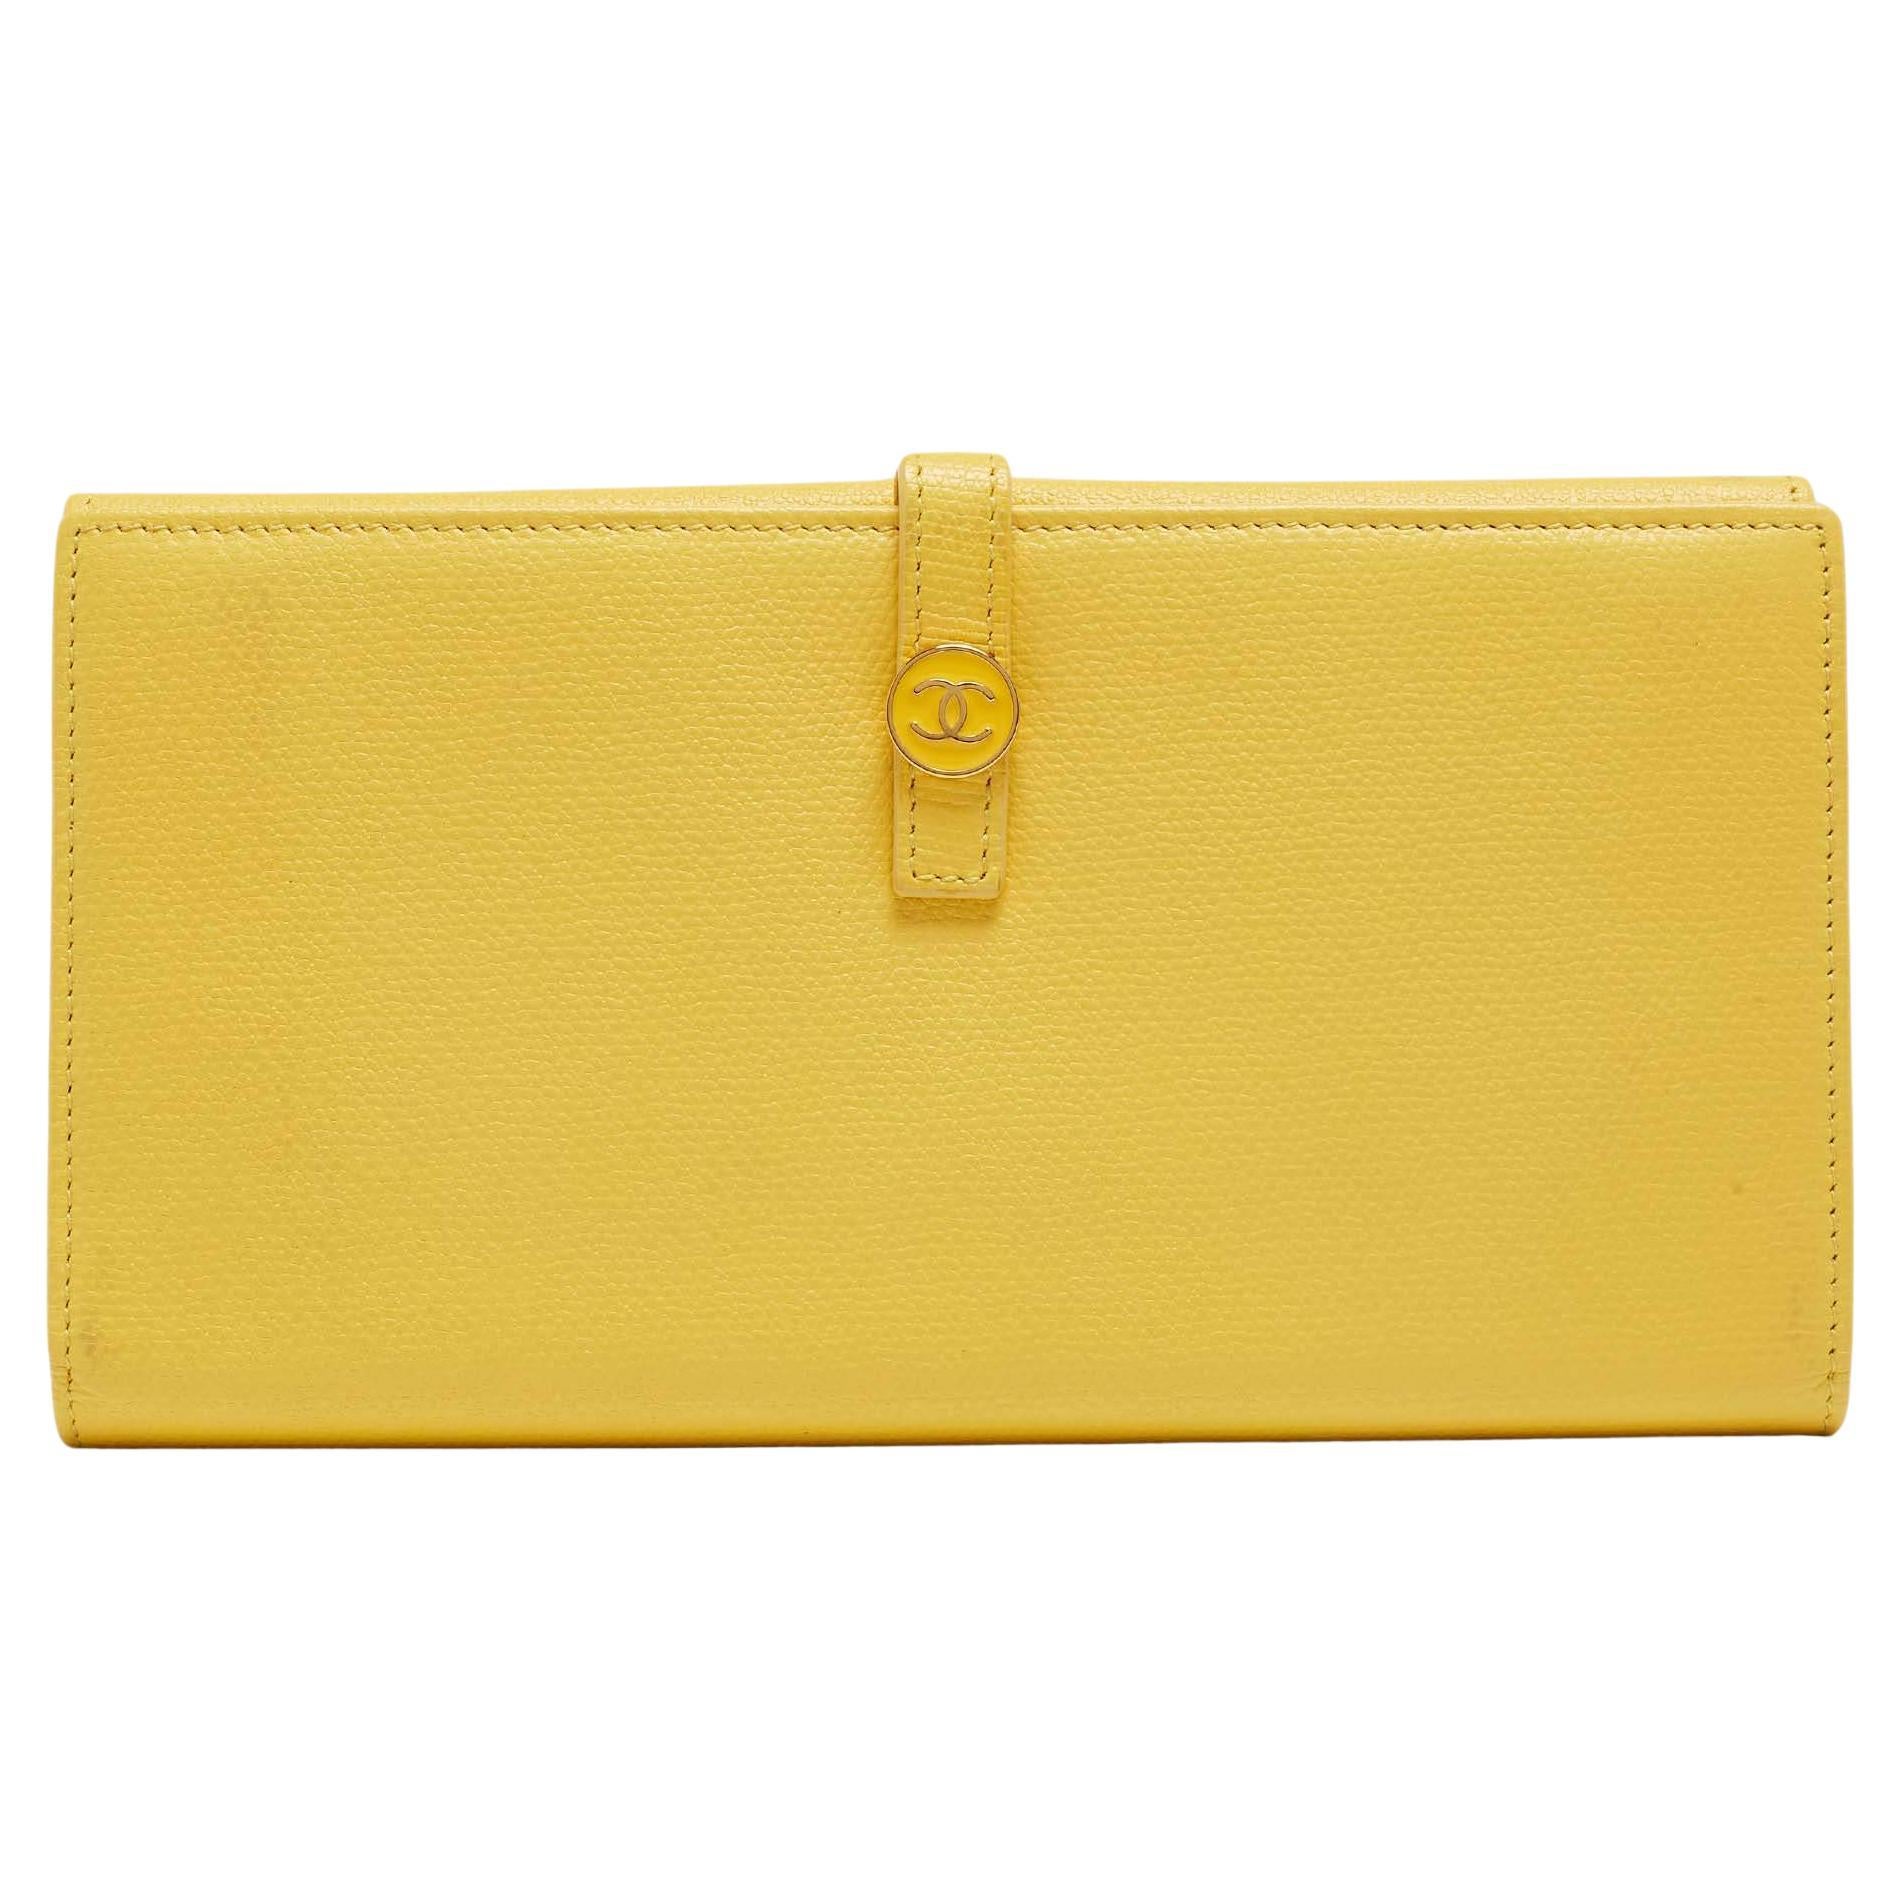 Chanel Yellow Leather CC Flap French Continental Wallet For Sale